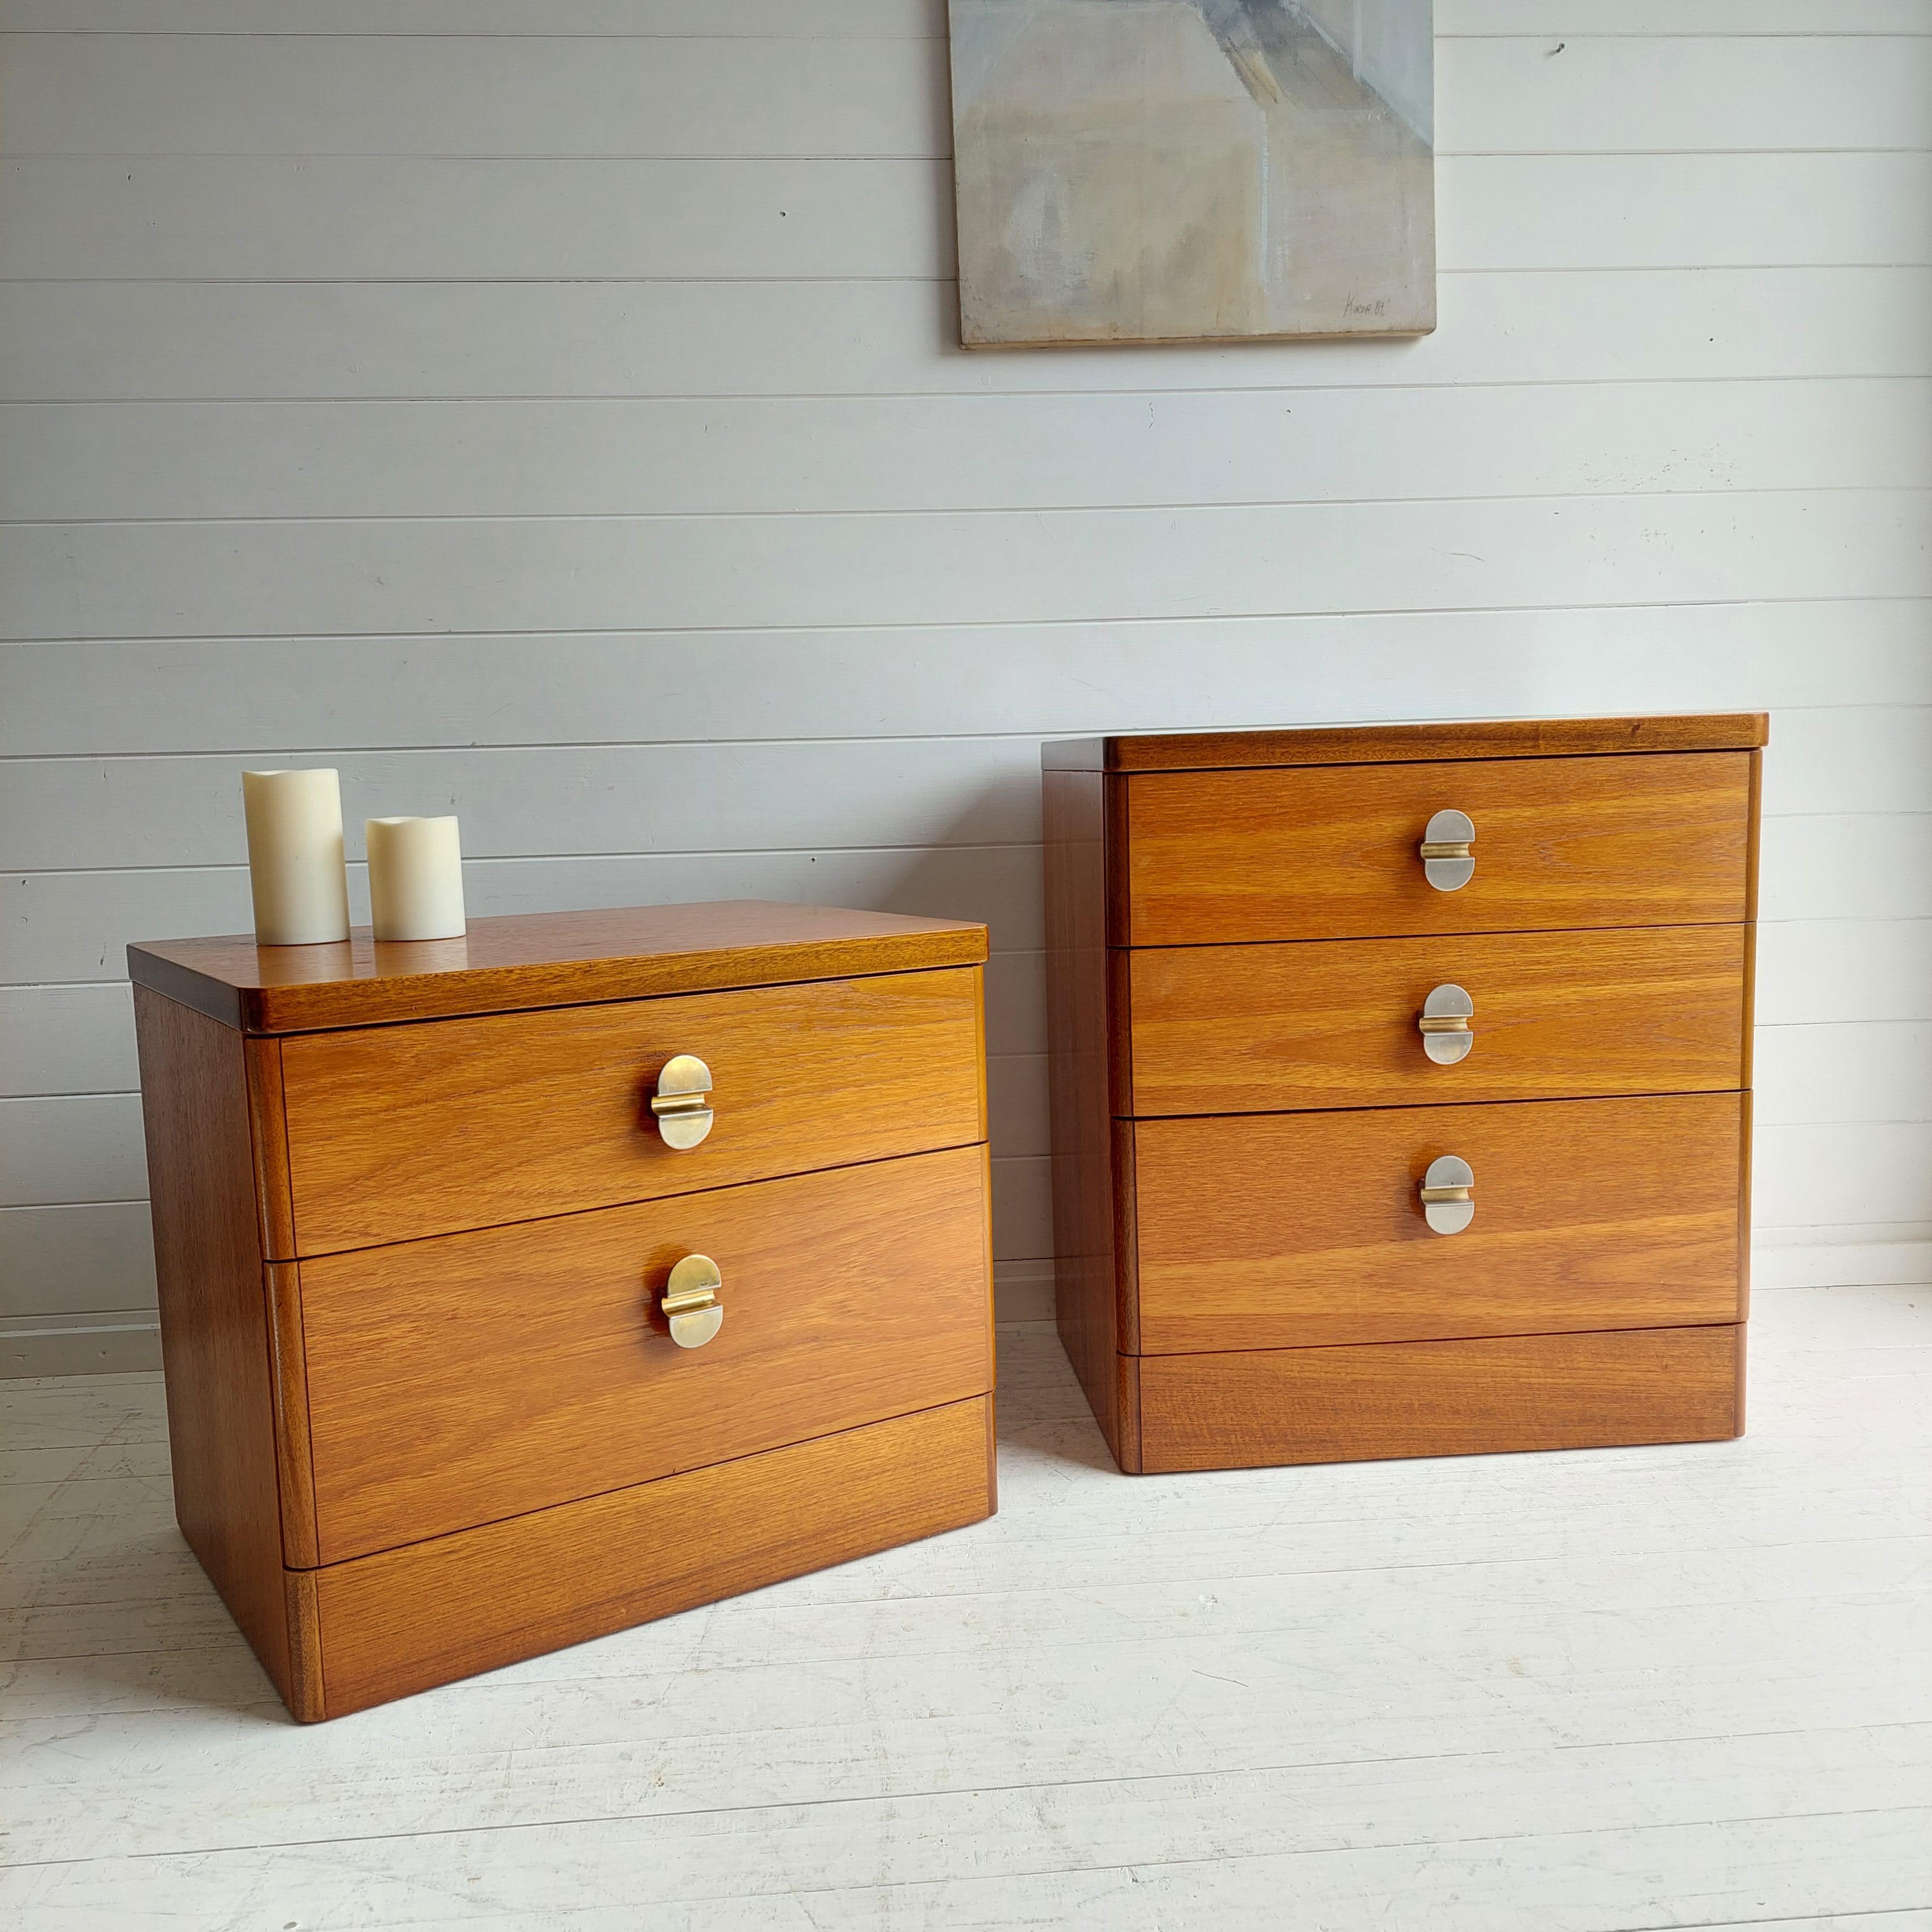 Stag Cantata Teak 2 and 3 Drawer Bedside Cabinets.
Designed by John & Sylvia Reid - Vintage 70s
They really do have a great design.
The units have 2 and 3 drawers allowing for penty of storage while still have a very compact design.
They have